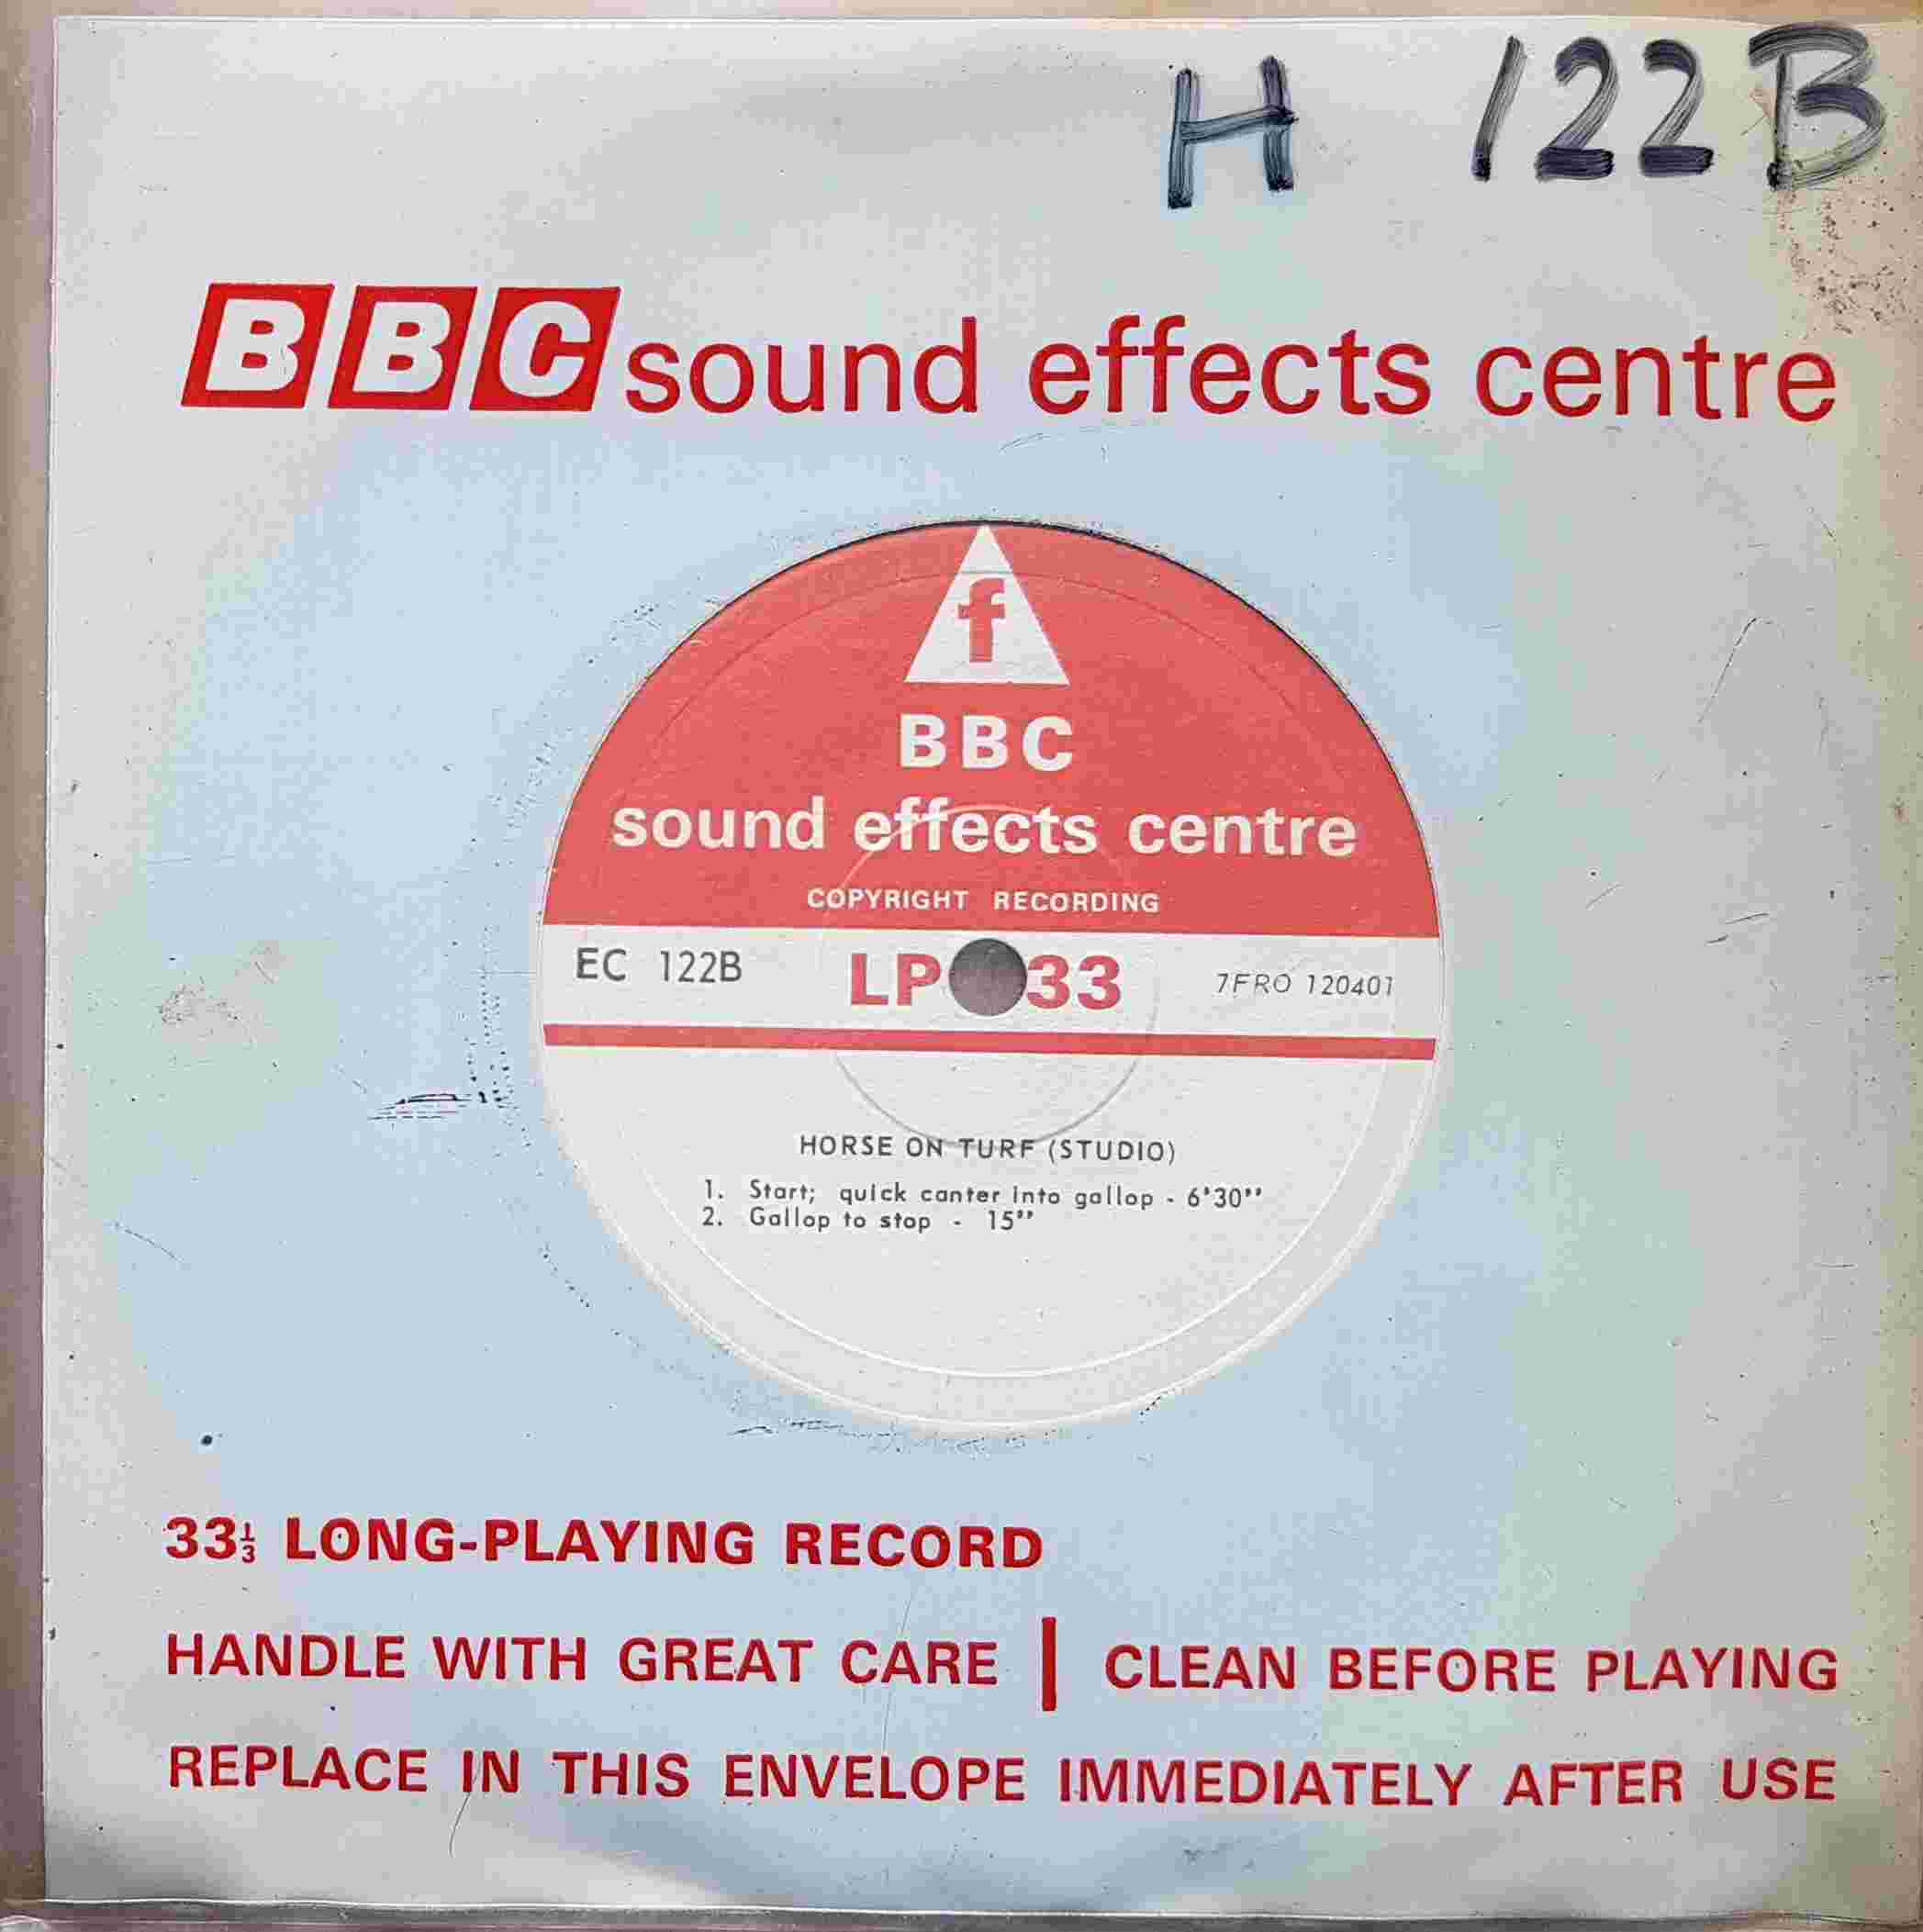 Picture of EC 122B Horse on turf (Studio) / 2 horses on turf (Studio) by artist Not registered from the BBC singles - Records and Tapes library